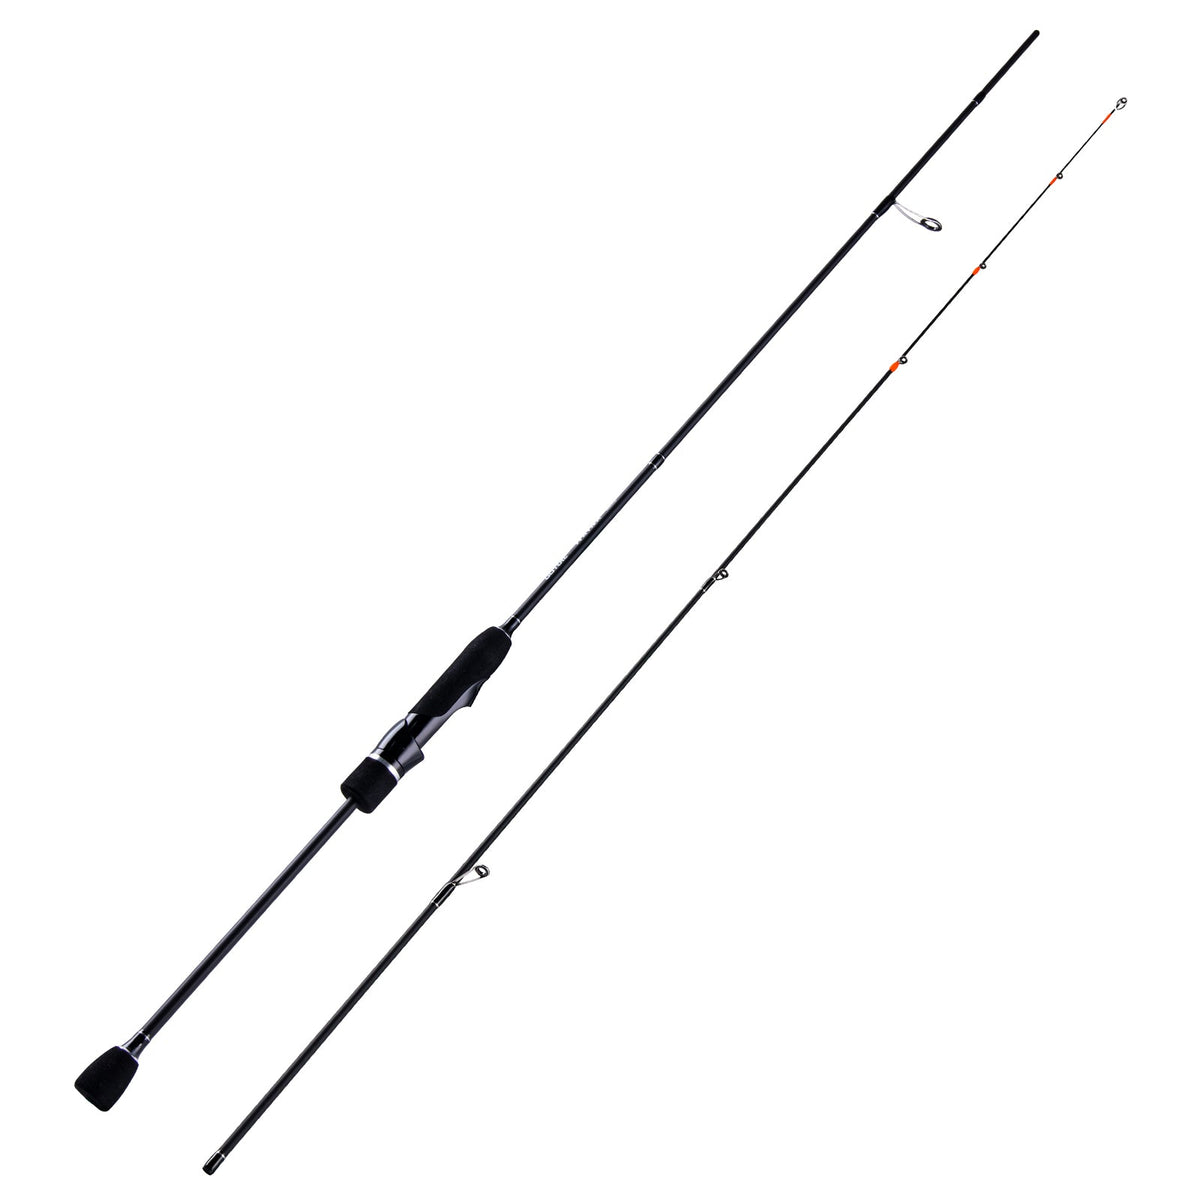 Goture Ultralight Fishing Rod, 2 Piece Crappie Trout Rod, Spinning/Casting Rod